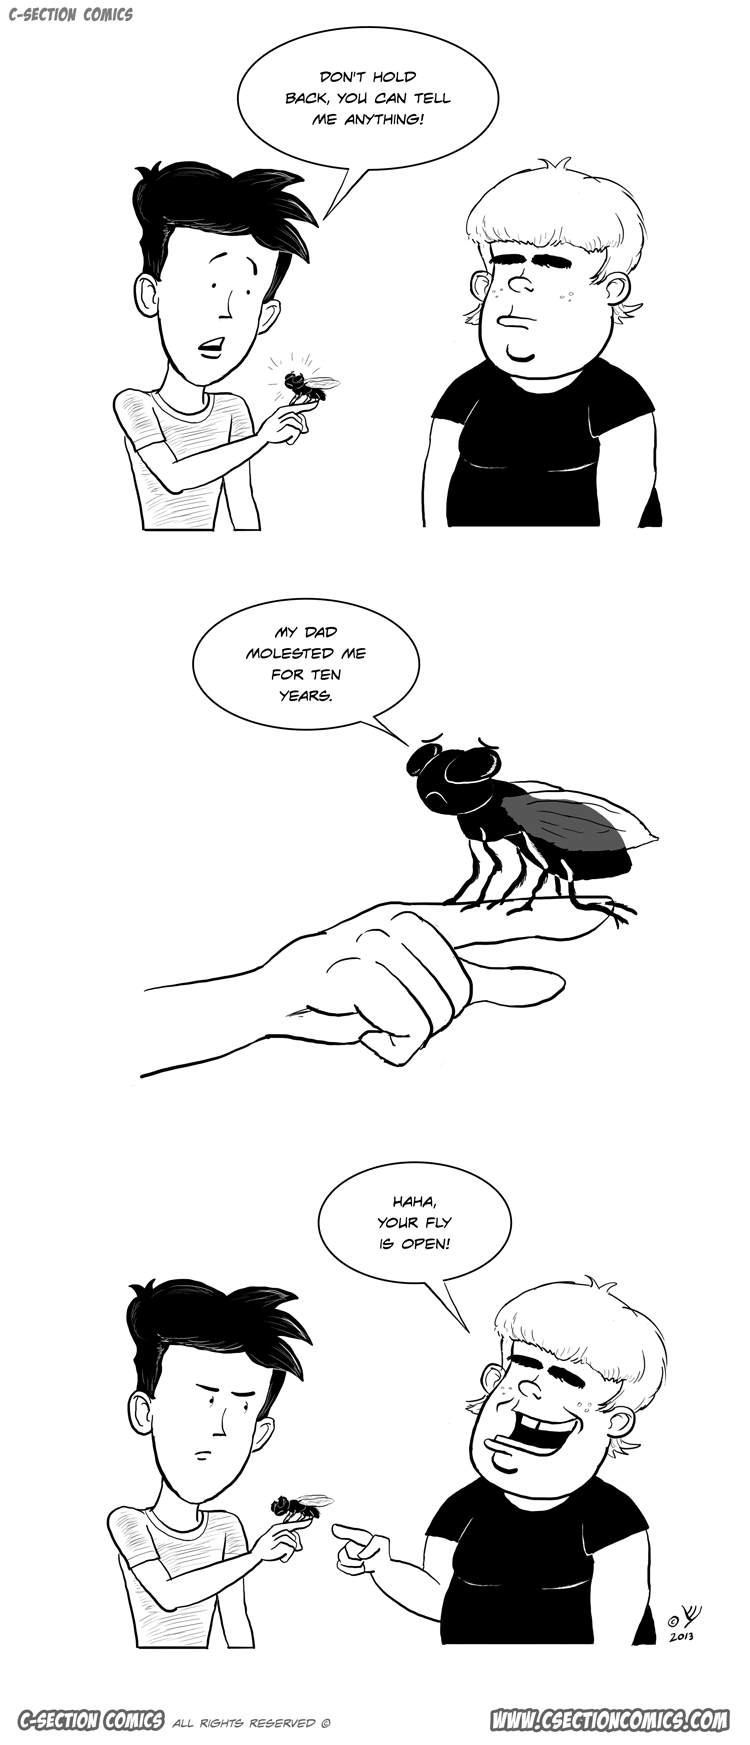 Poor Fly - by C-Section Comics